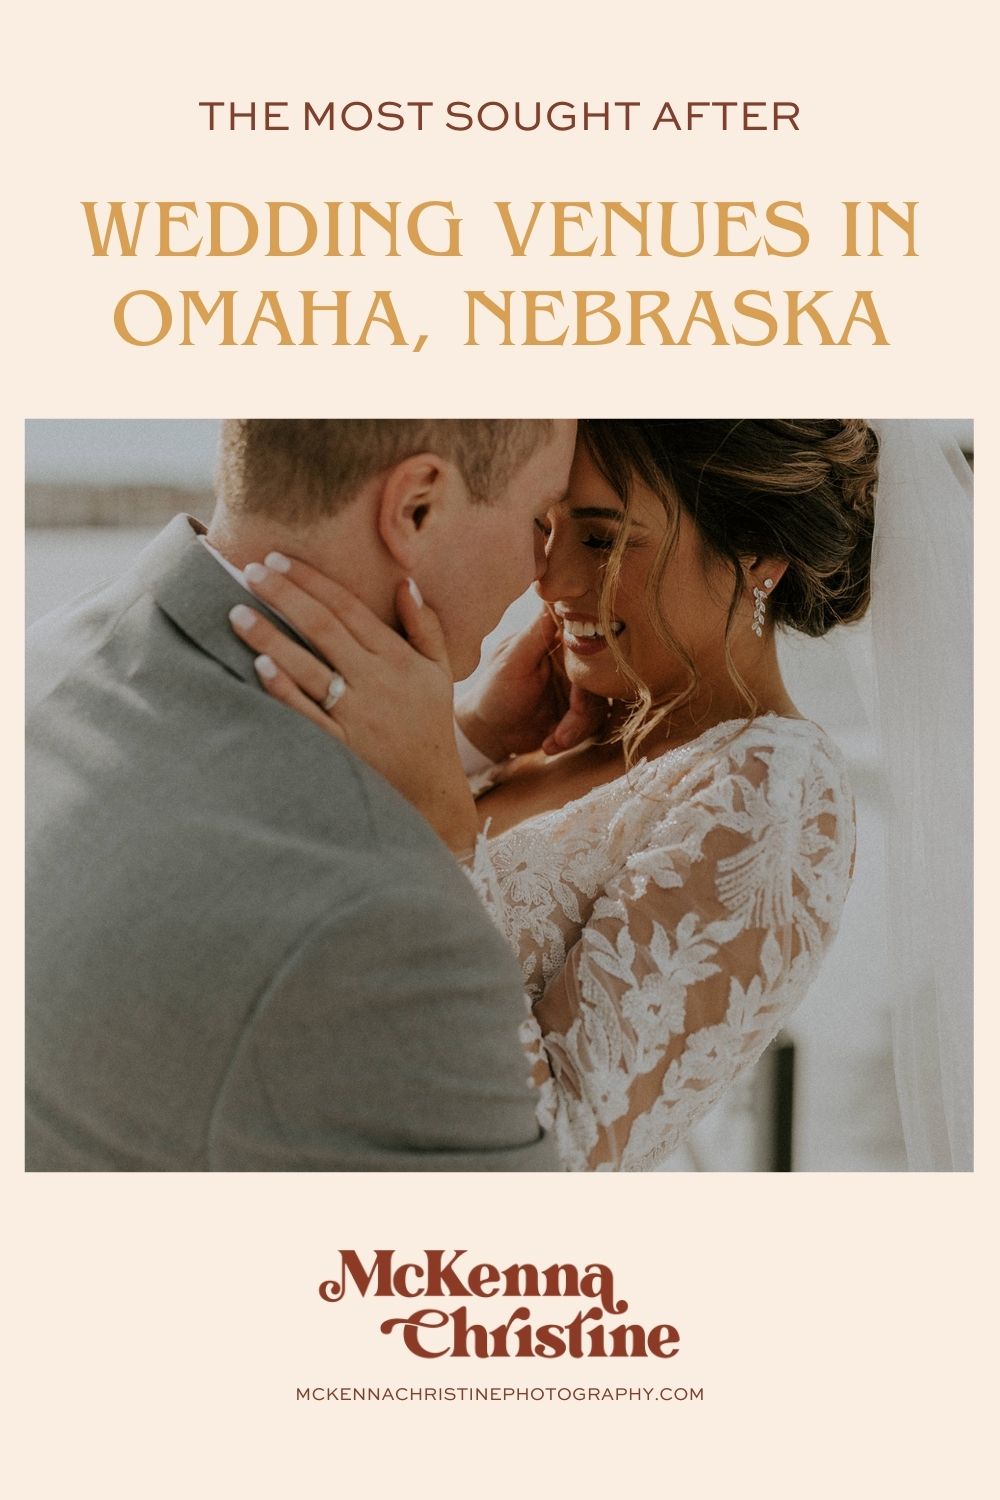 Close-up shot of bride and groom smiling and cupping each other's faces; image overlaid with text that reads The Most Sought After Wedding Venues in Omaha, Nebraska